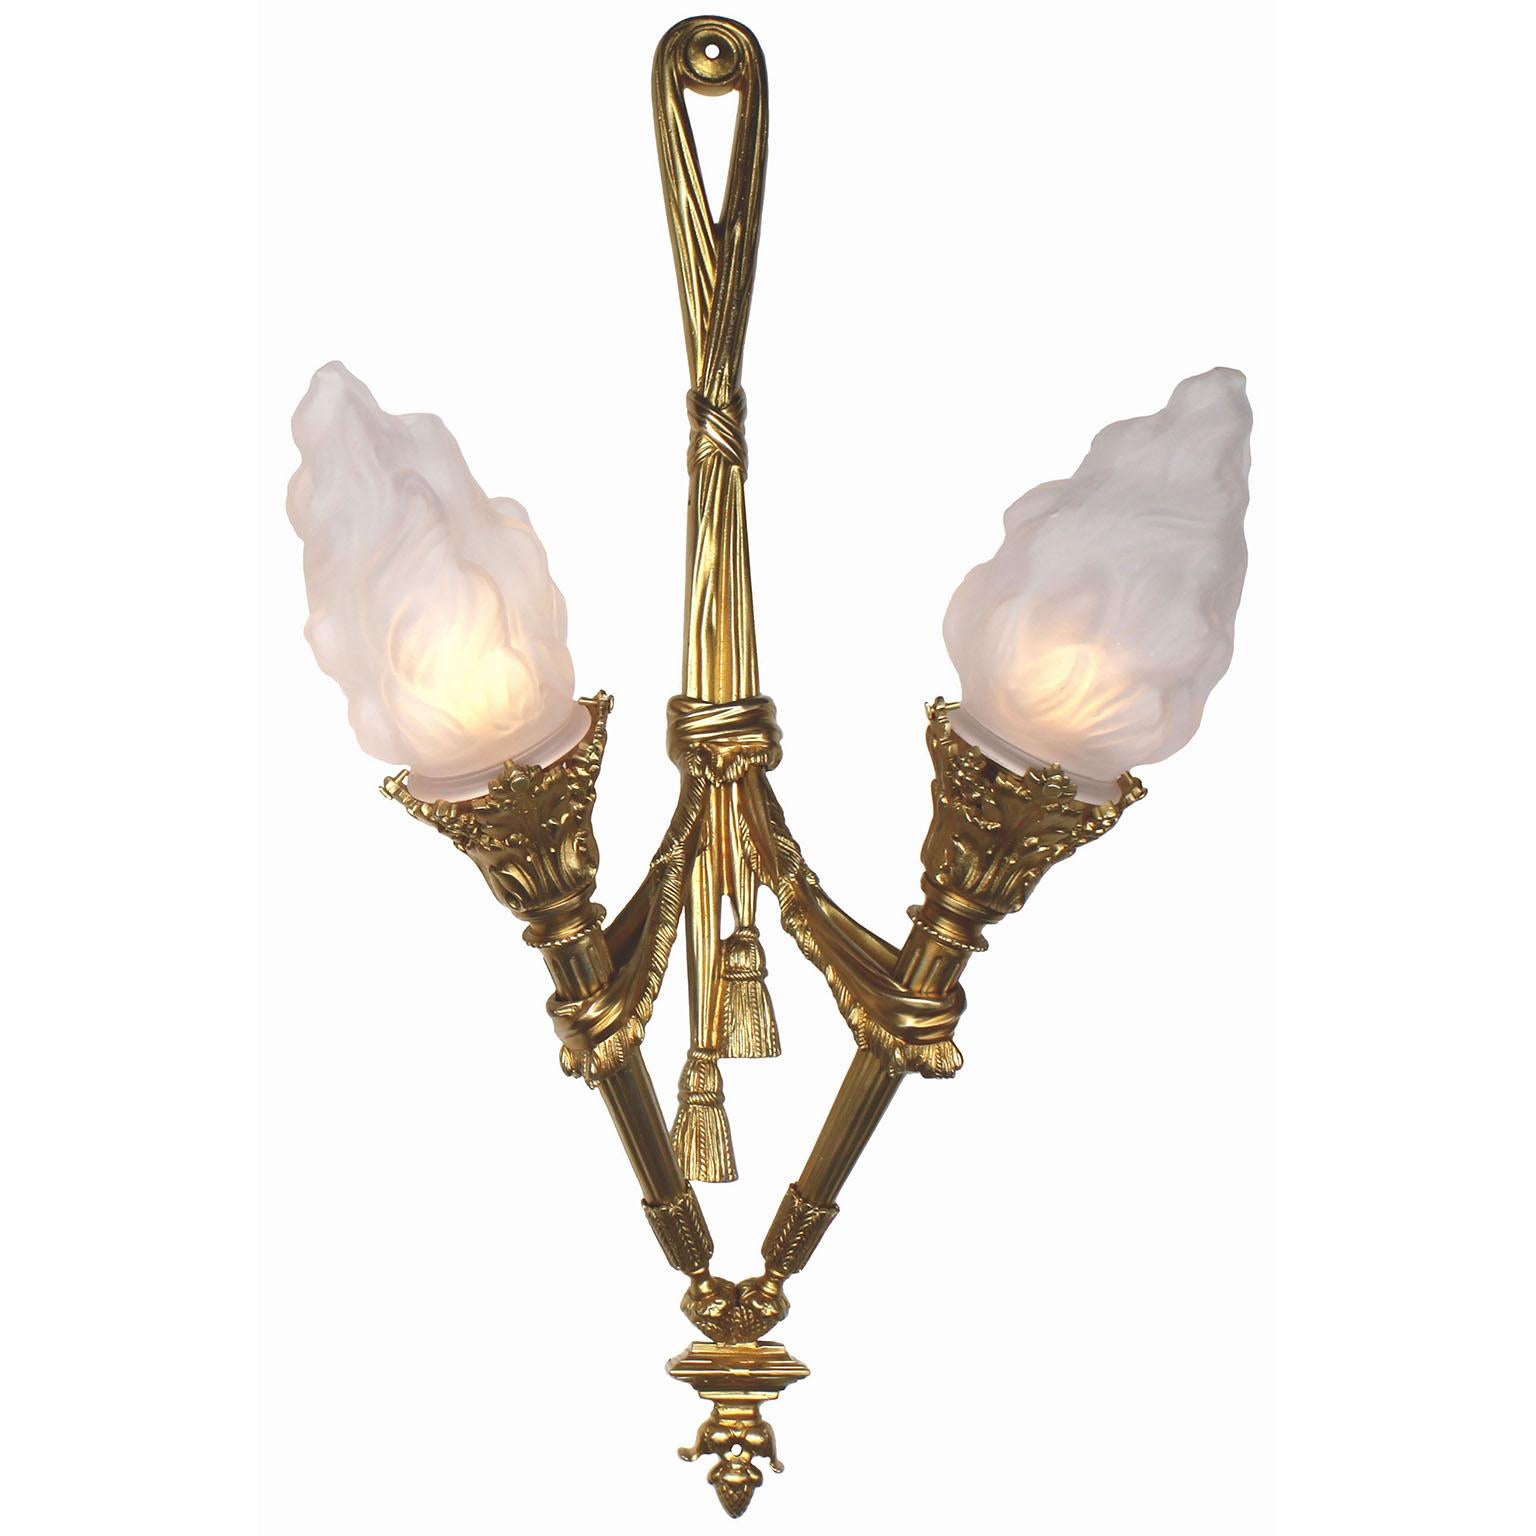 20th Century Pair of French Empire Style Gilt-Bronze Two-Light Wall Torchère Sconces For Sale